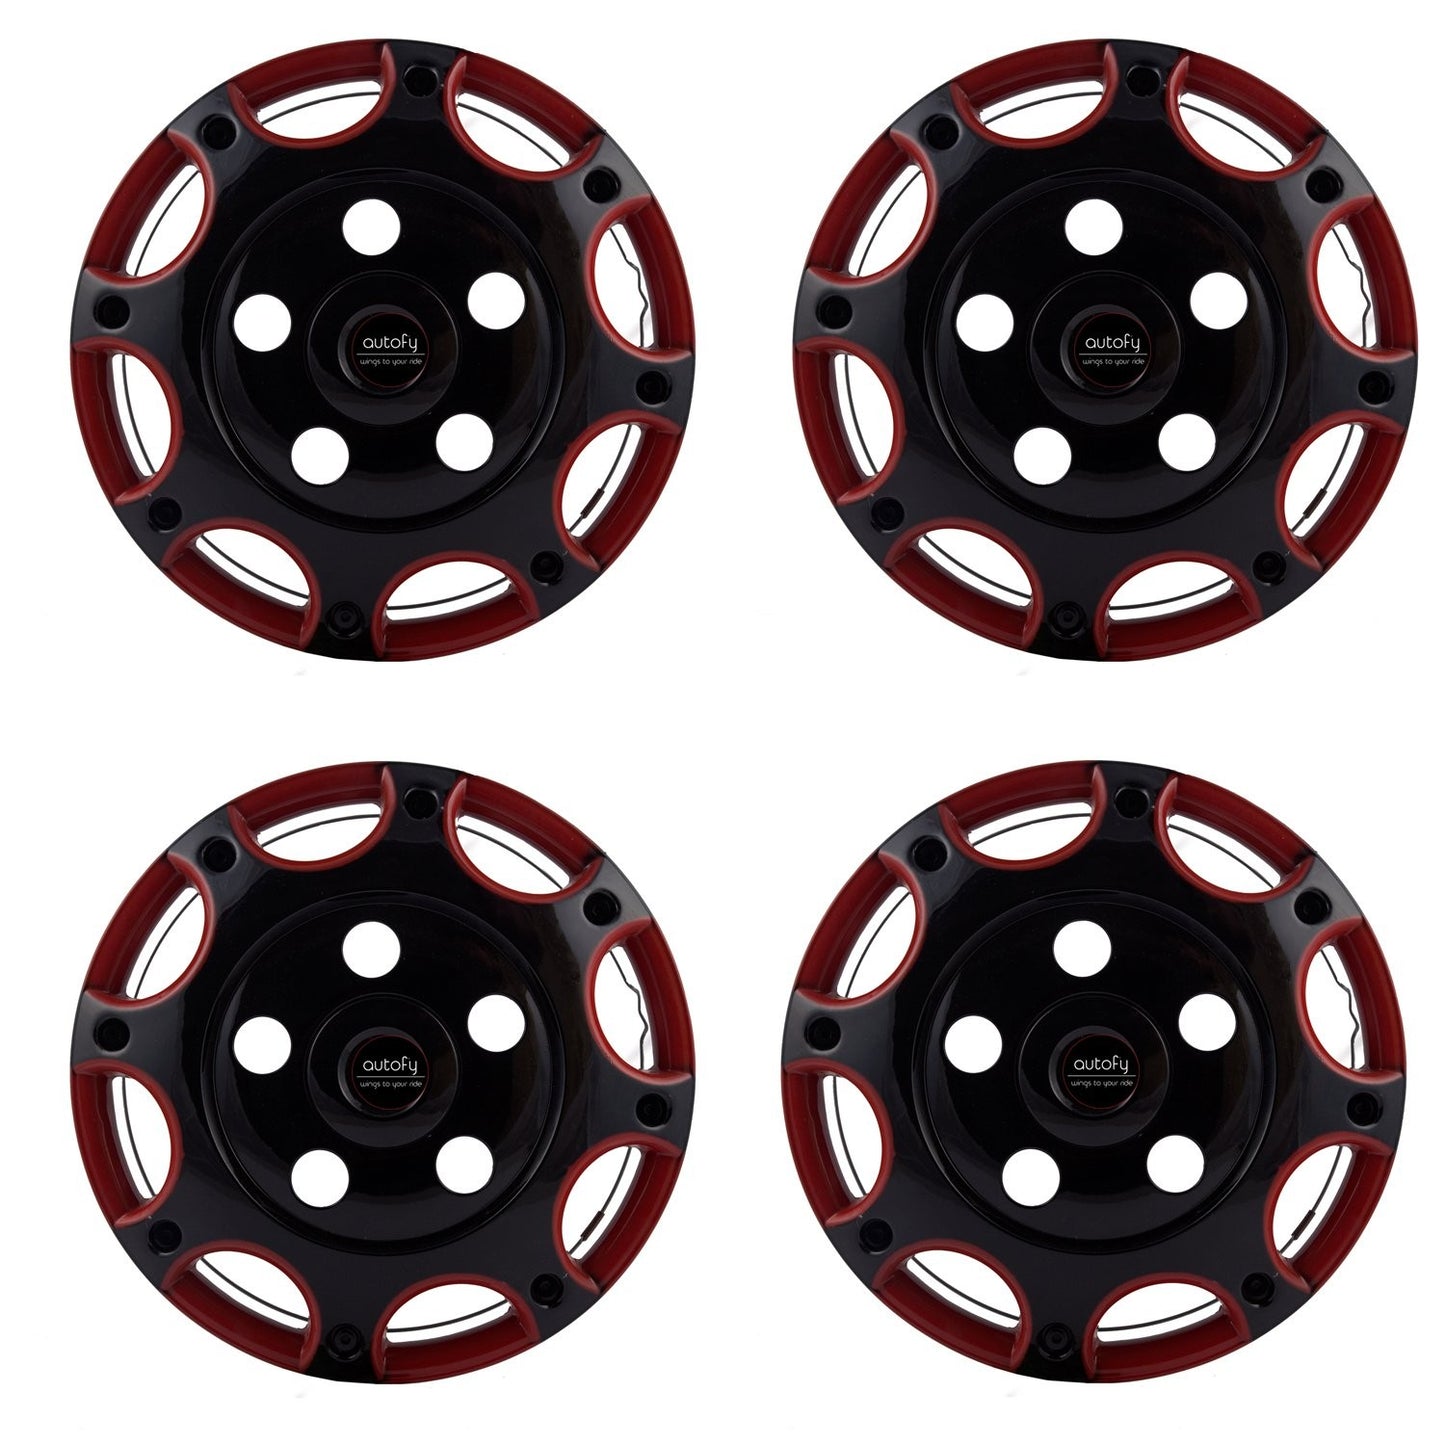 Autofy 15-inch 8 Spokes Snap-On Universal Wheel Cap Wheel Cover Hub Cap with Lug Nut Holes (Set of 4, Black and Red)